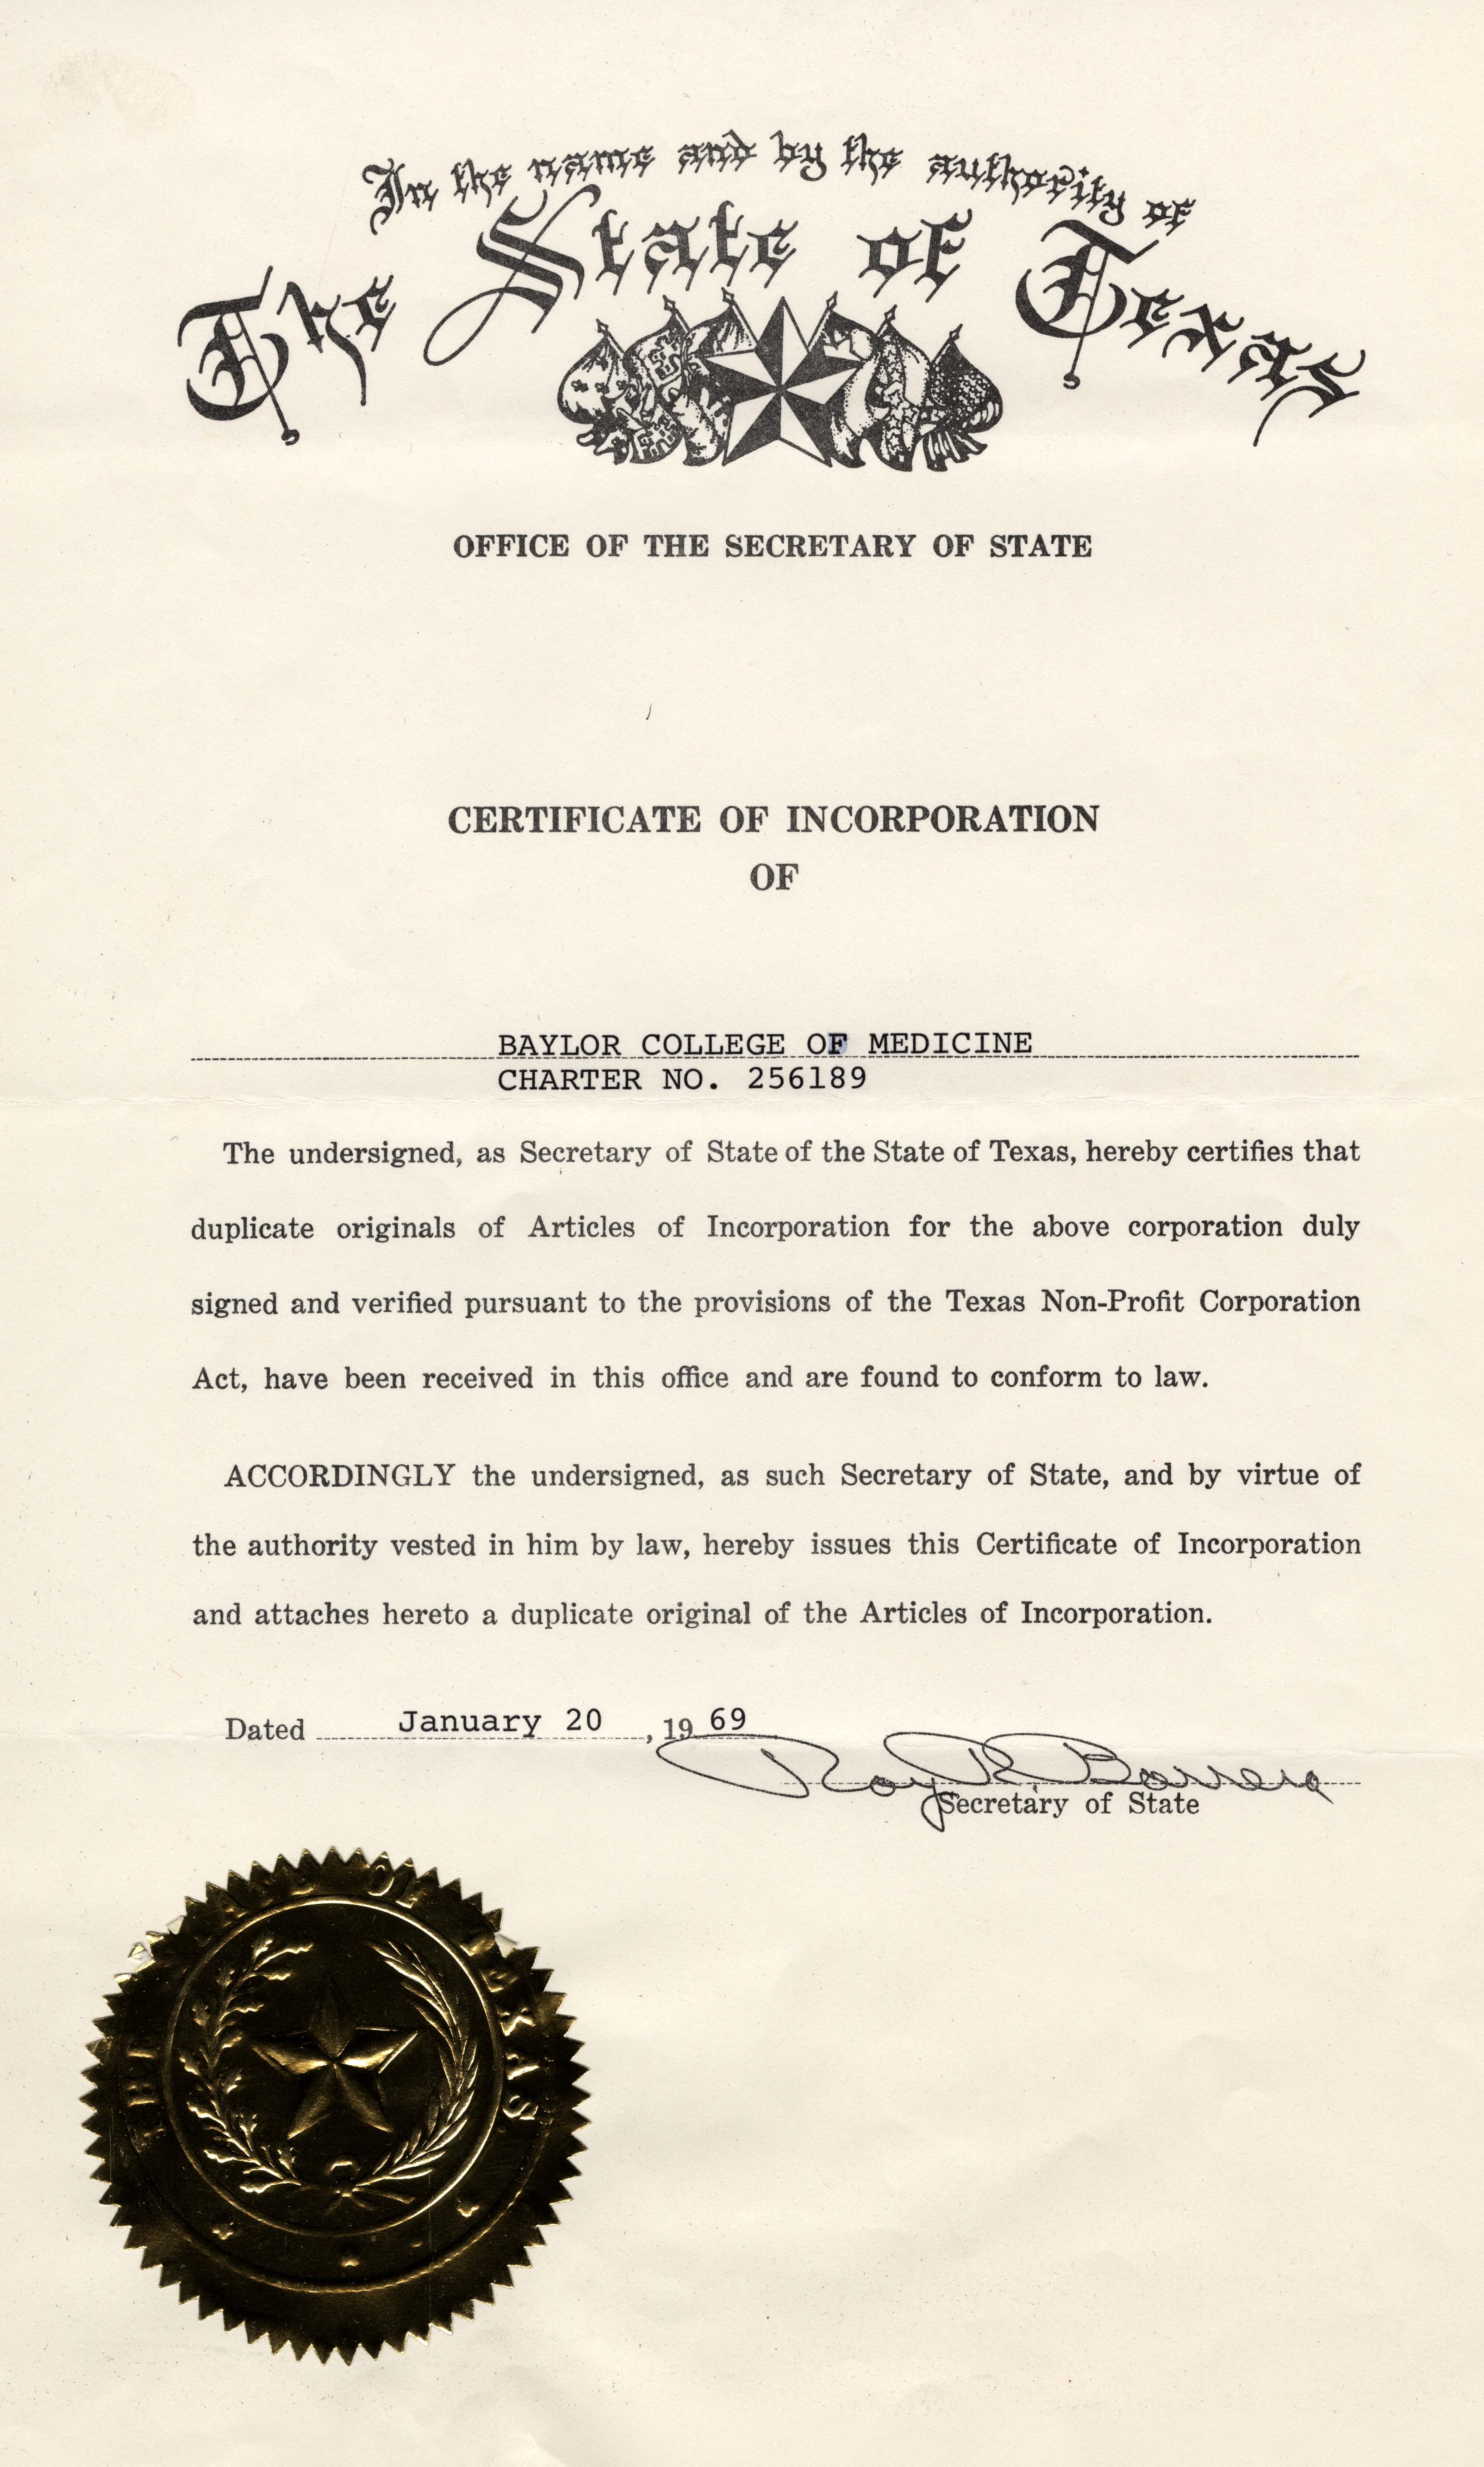 The Certificate of Incorporation for Baylor College of Medicine signed in 1969 by the Texas Legislature. Image courtesy Baylor College of Medicine Archives.